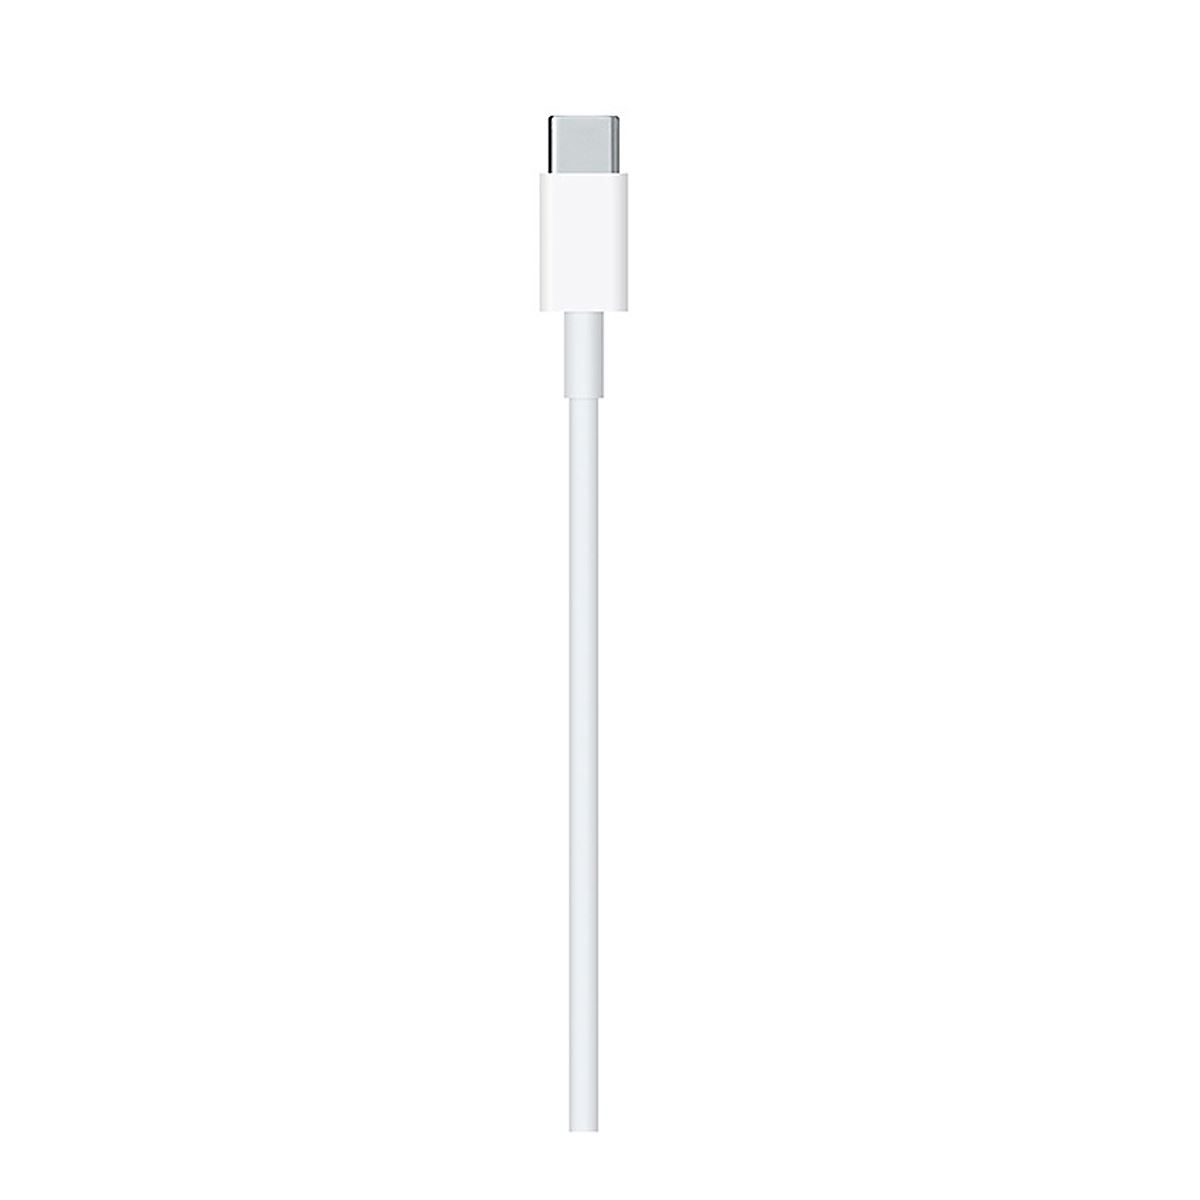 USB-c to lightning cable (1 m)-ame